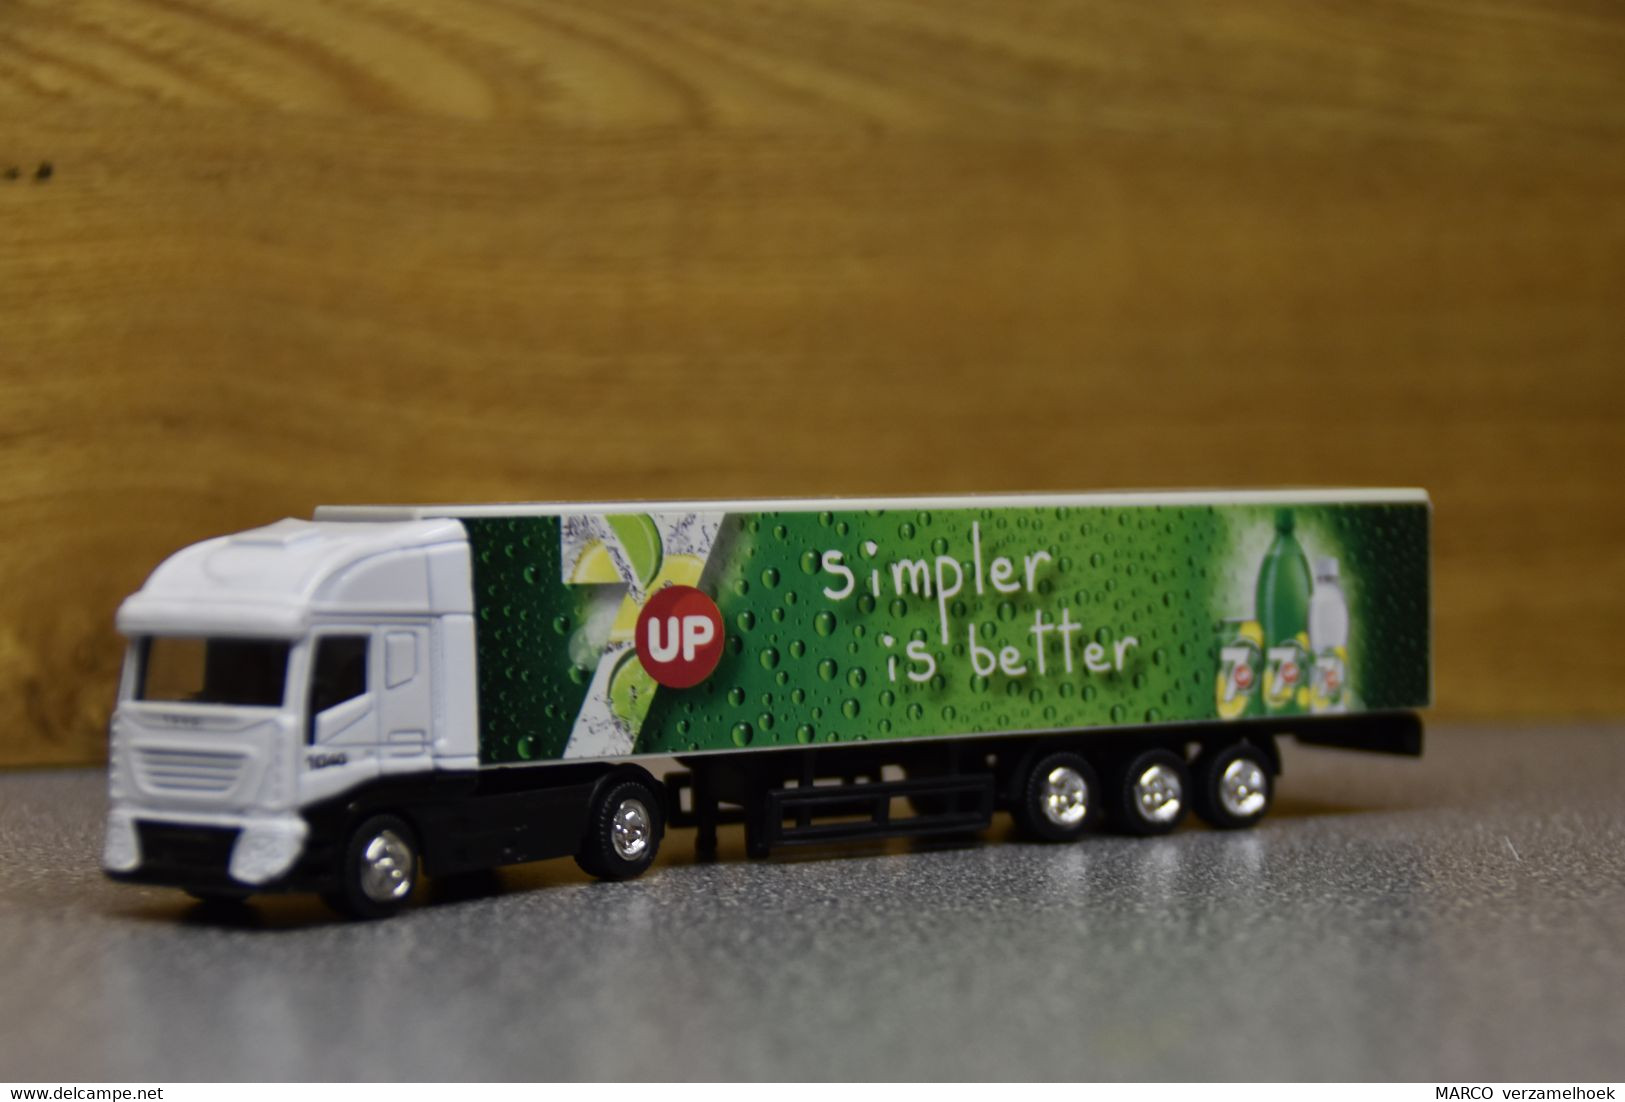 Truck 1040 7up Pepsico-Dr Pepper Snapple Group Scale 1:87 - Scala 1:87